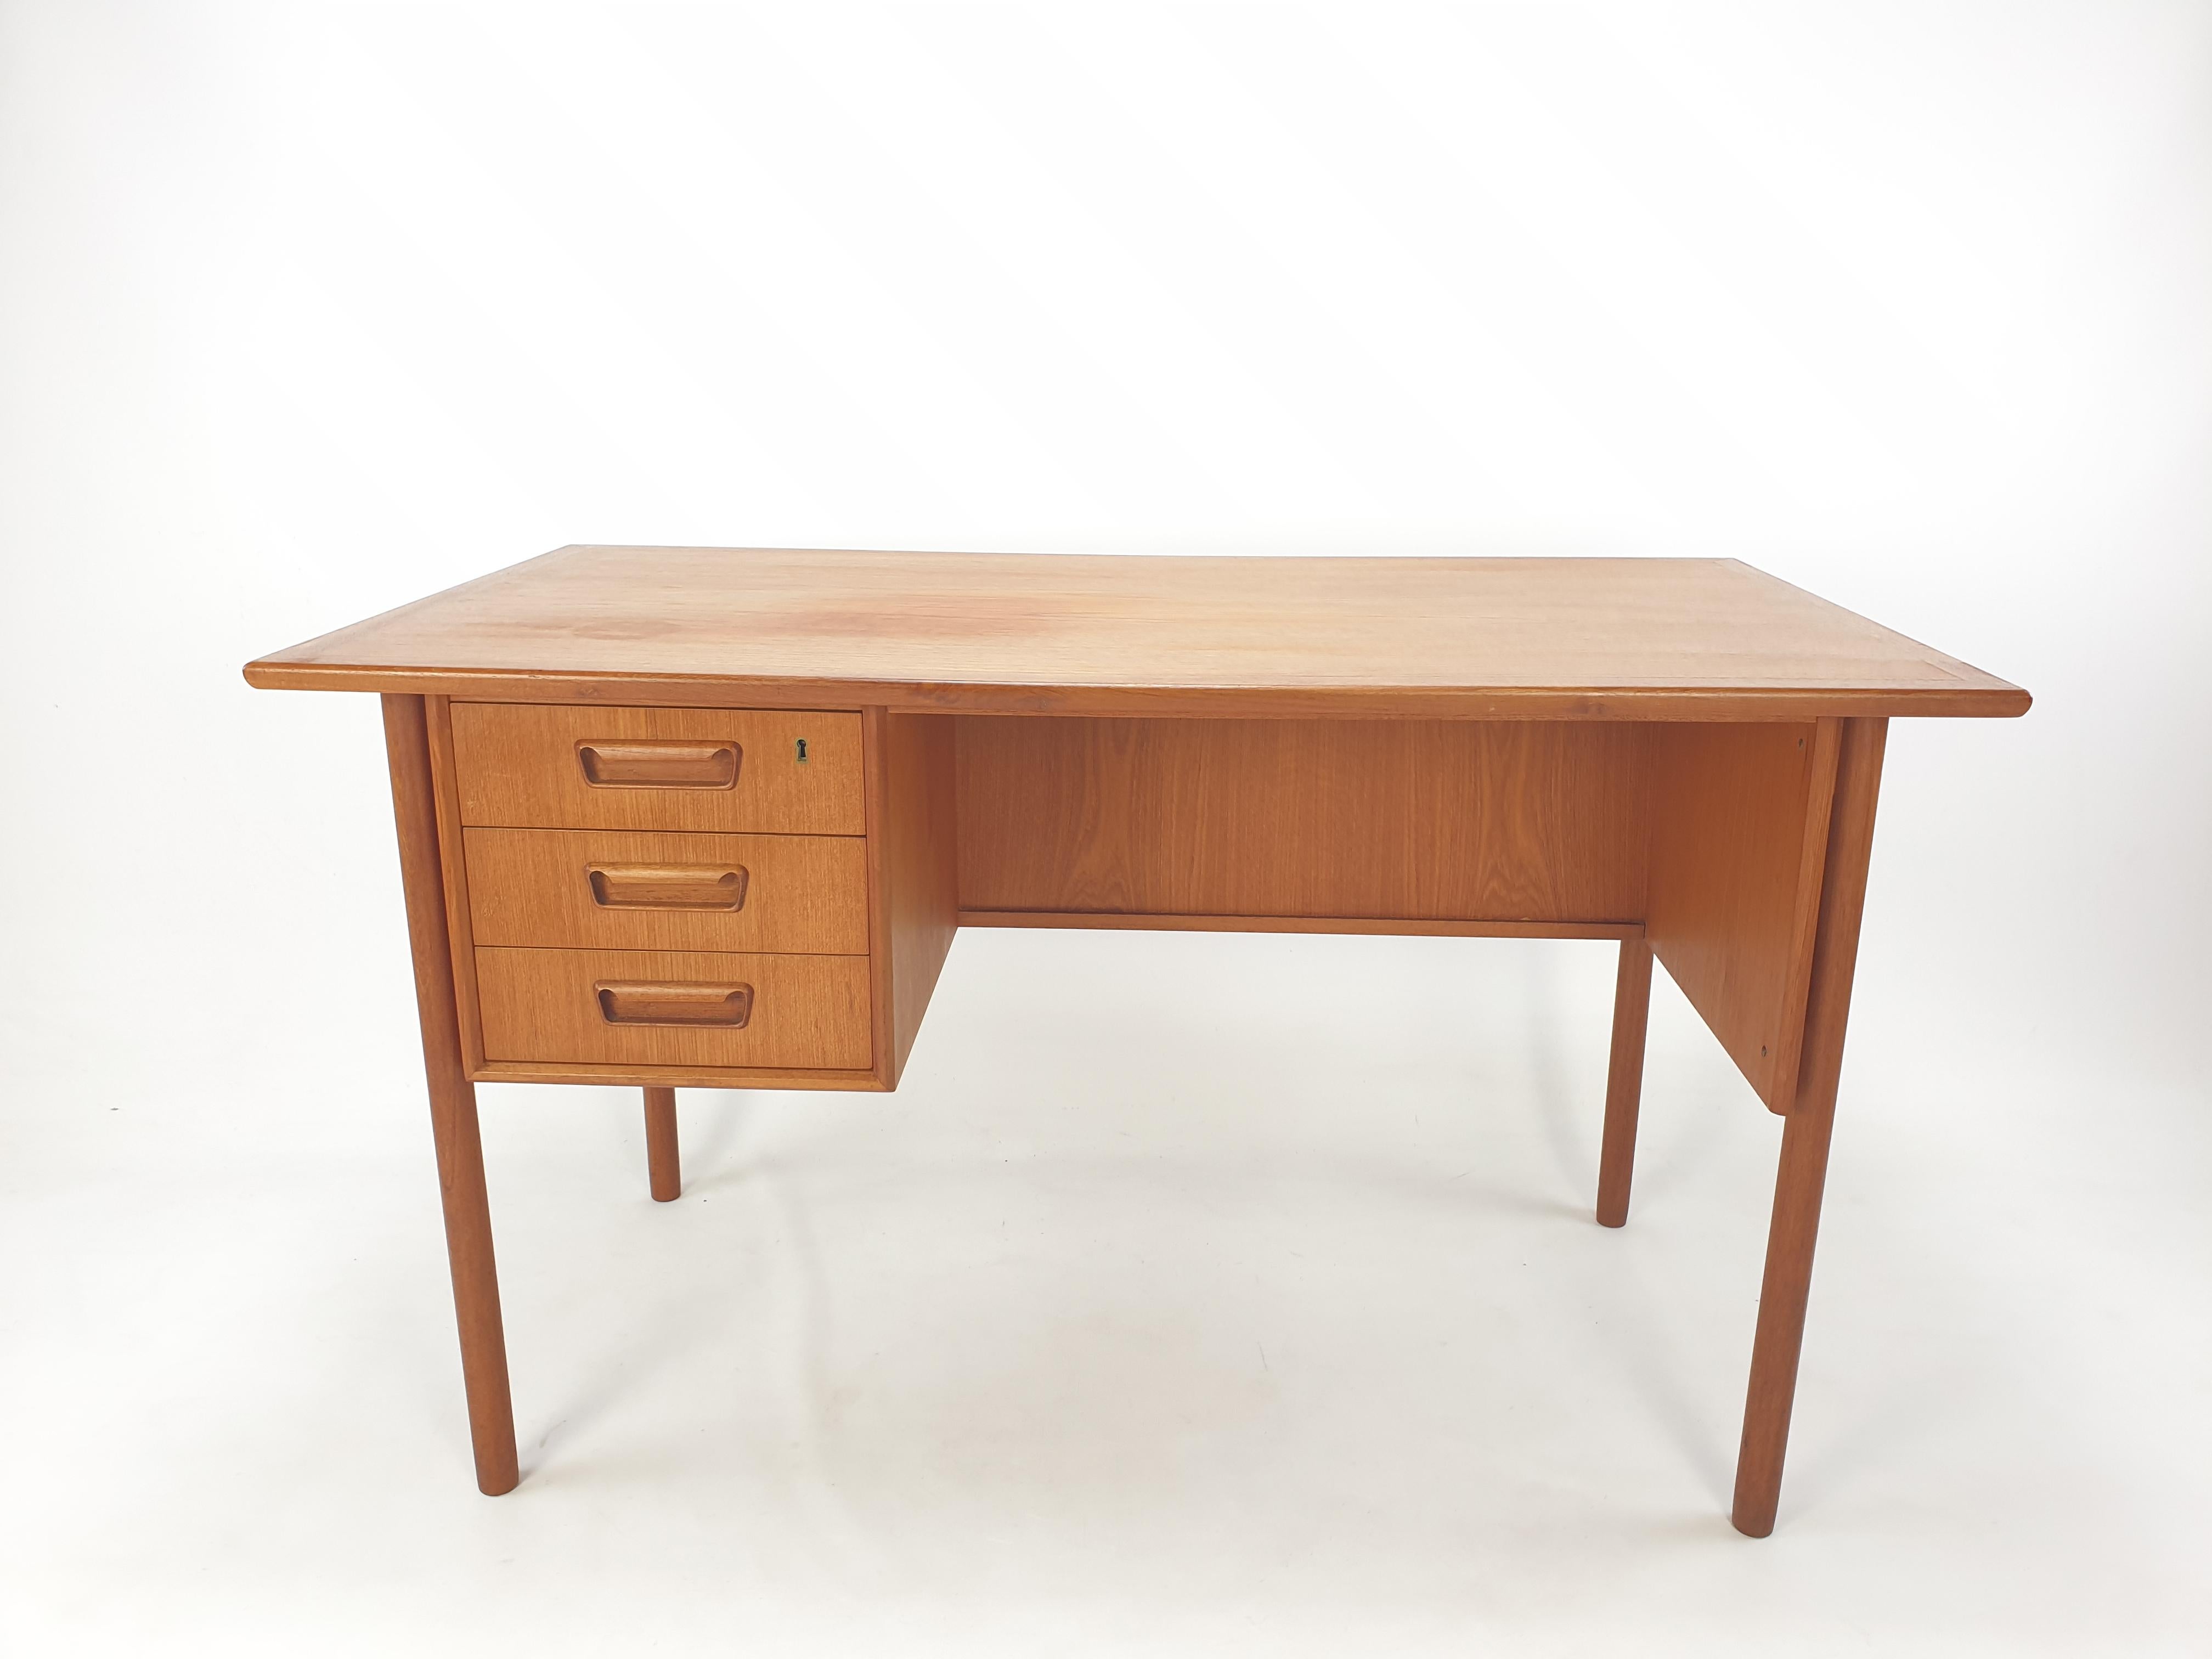 Very nice desk designed by G. Nielsen Tibergaard, produced in Denmark in the 1960s. 

The desk is made of teak and free standing thanks to the finished back side with open storage space for books or other items.

On the front there are three